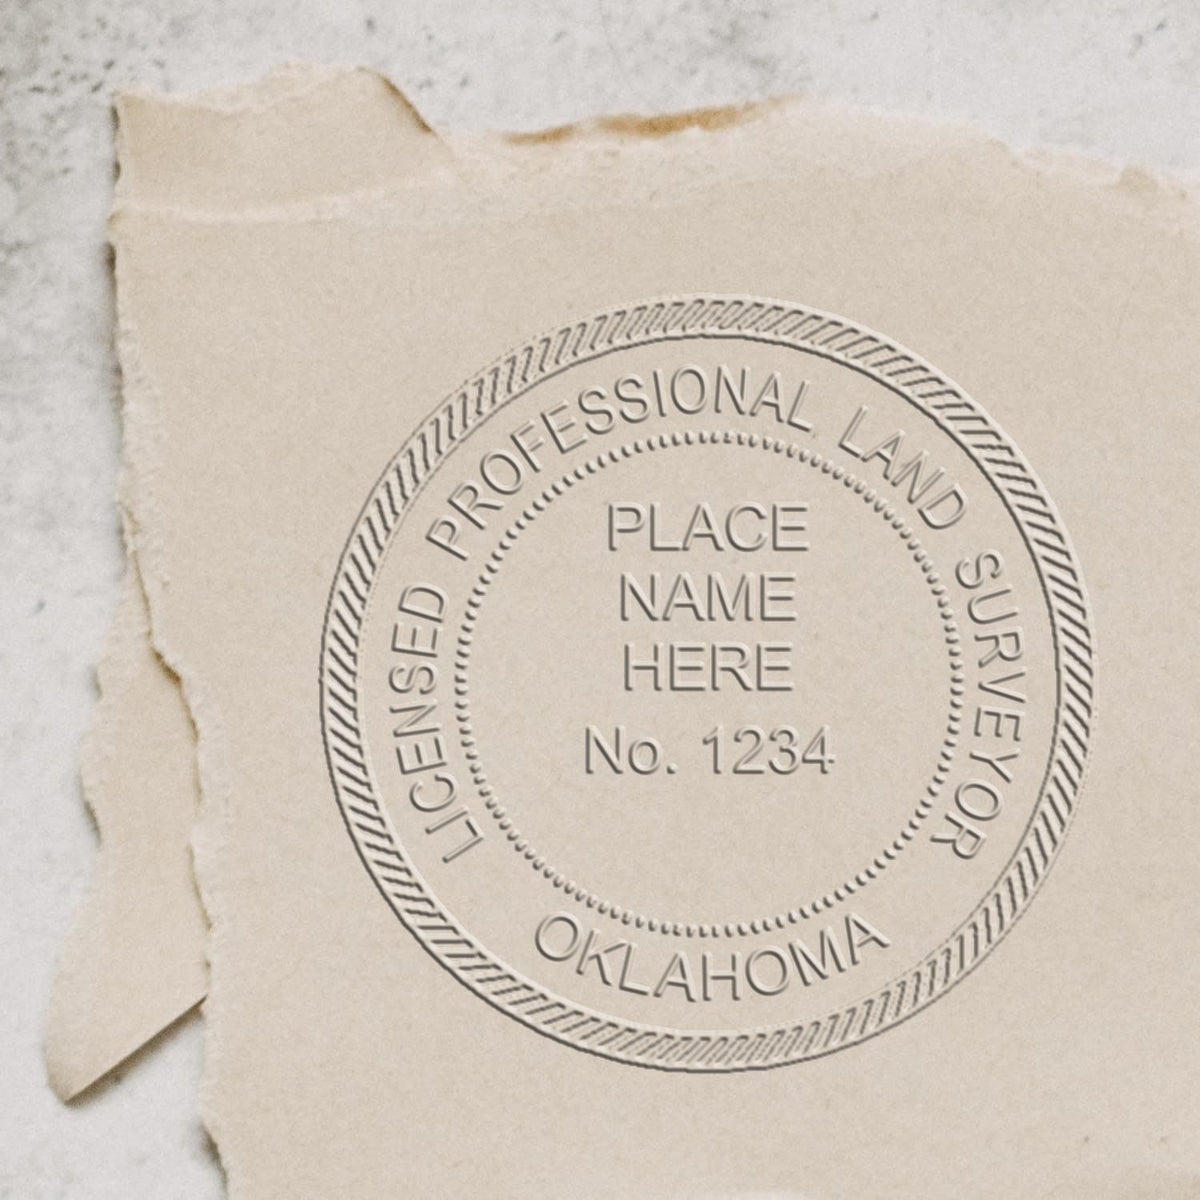 The Gift Oklahoma Land Surveyor Seal stamp impression comes to life with a crisp, detailed image stamped on paper - showcasing true professional quality.